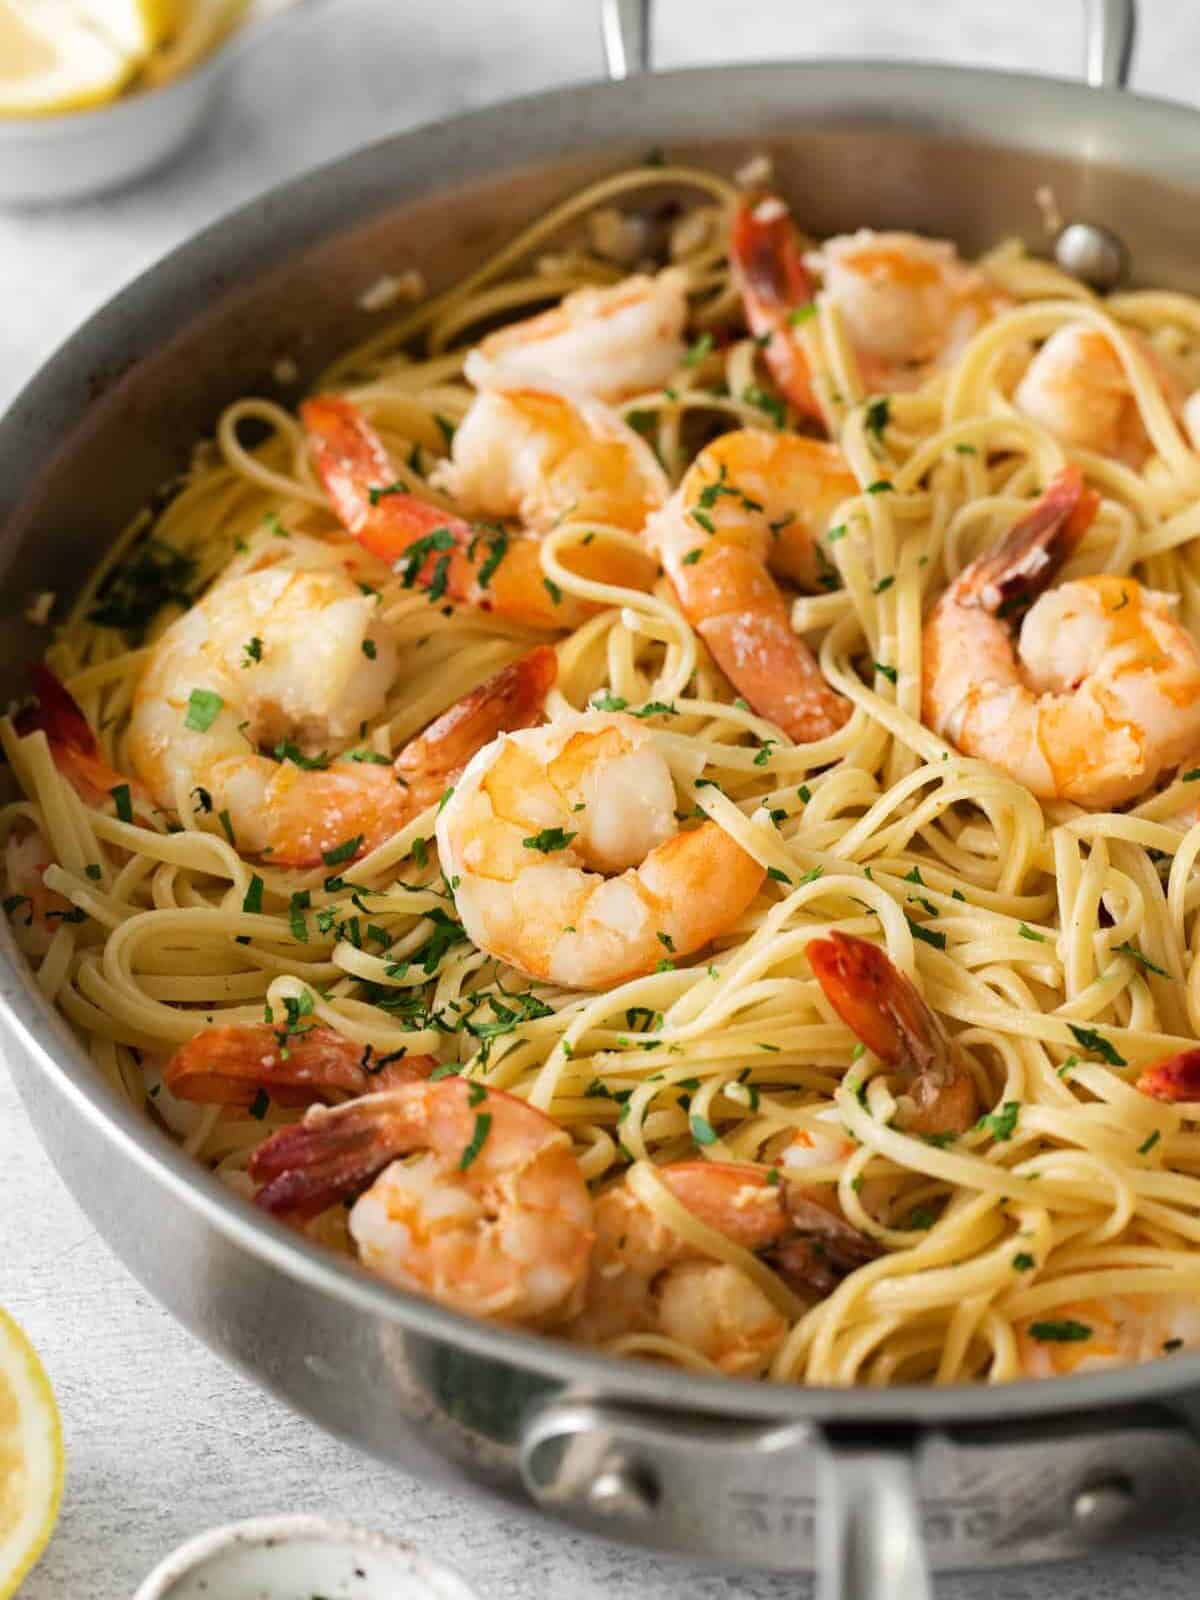 three-quarters view of shrimp scampi pasta in a frying pan.